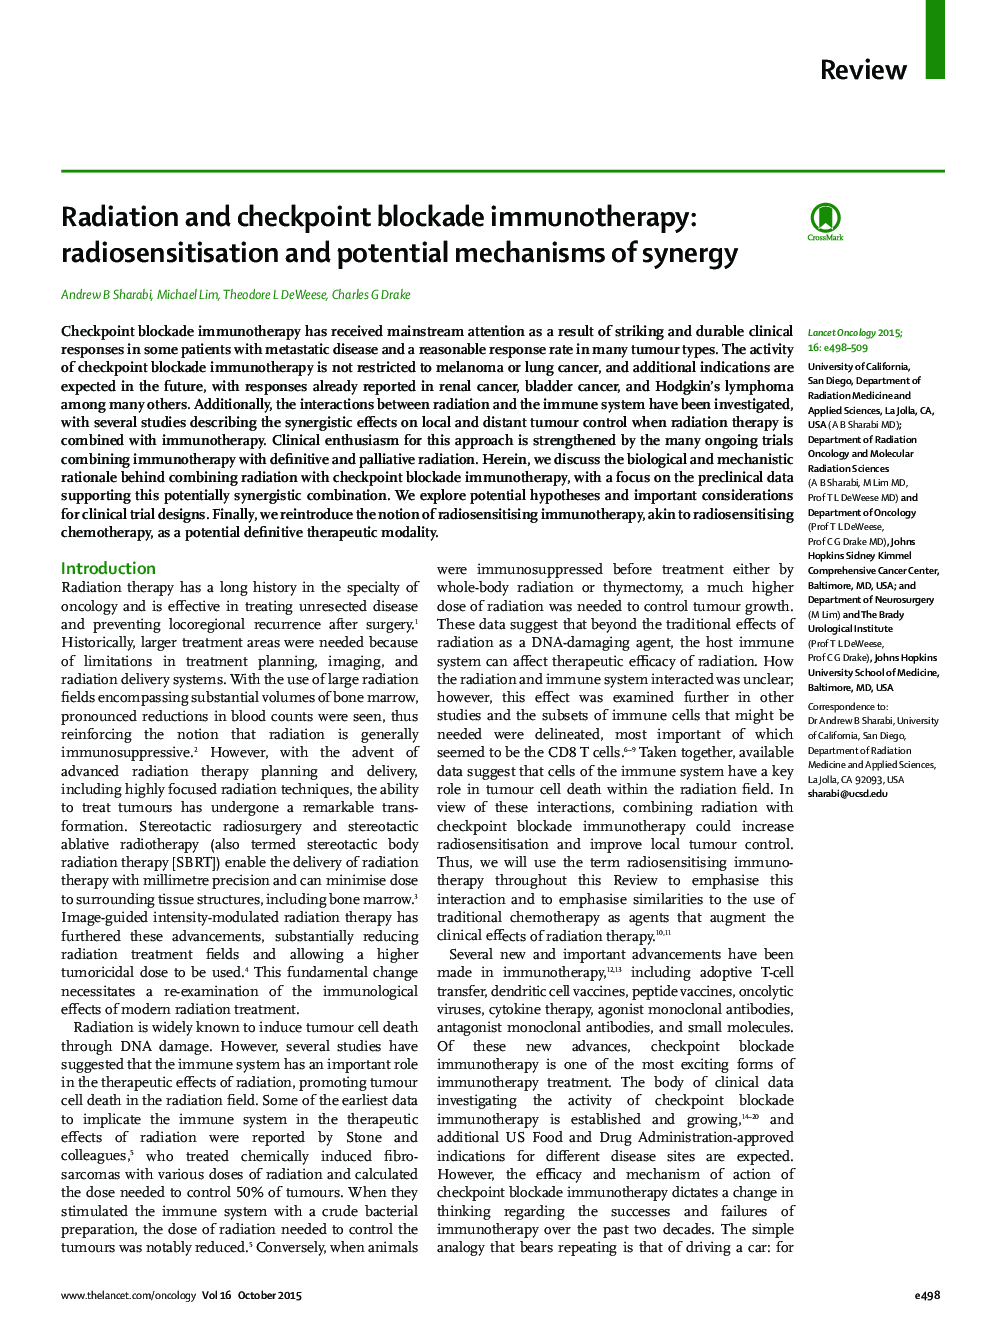 Radiation and checkpoint blockade immunotherapy: radiosensitisation and potential mechanisms of synergy